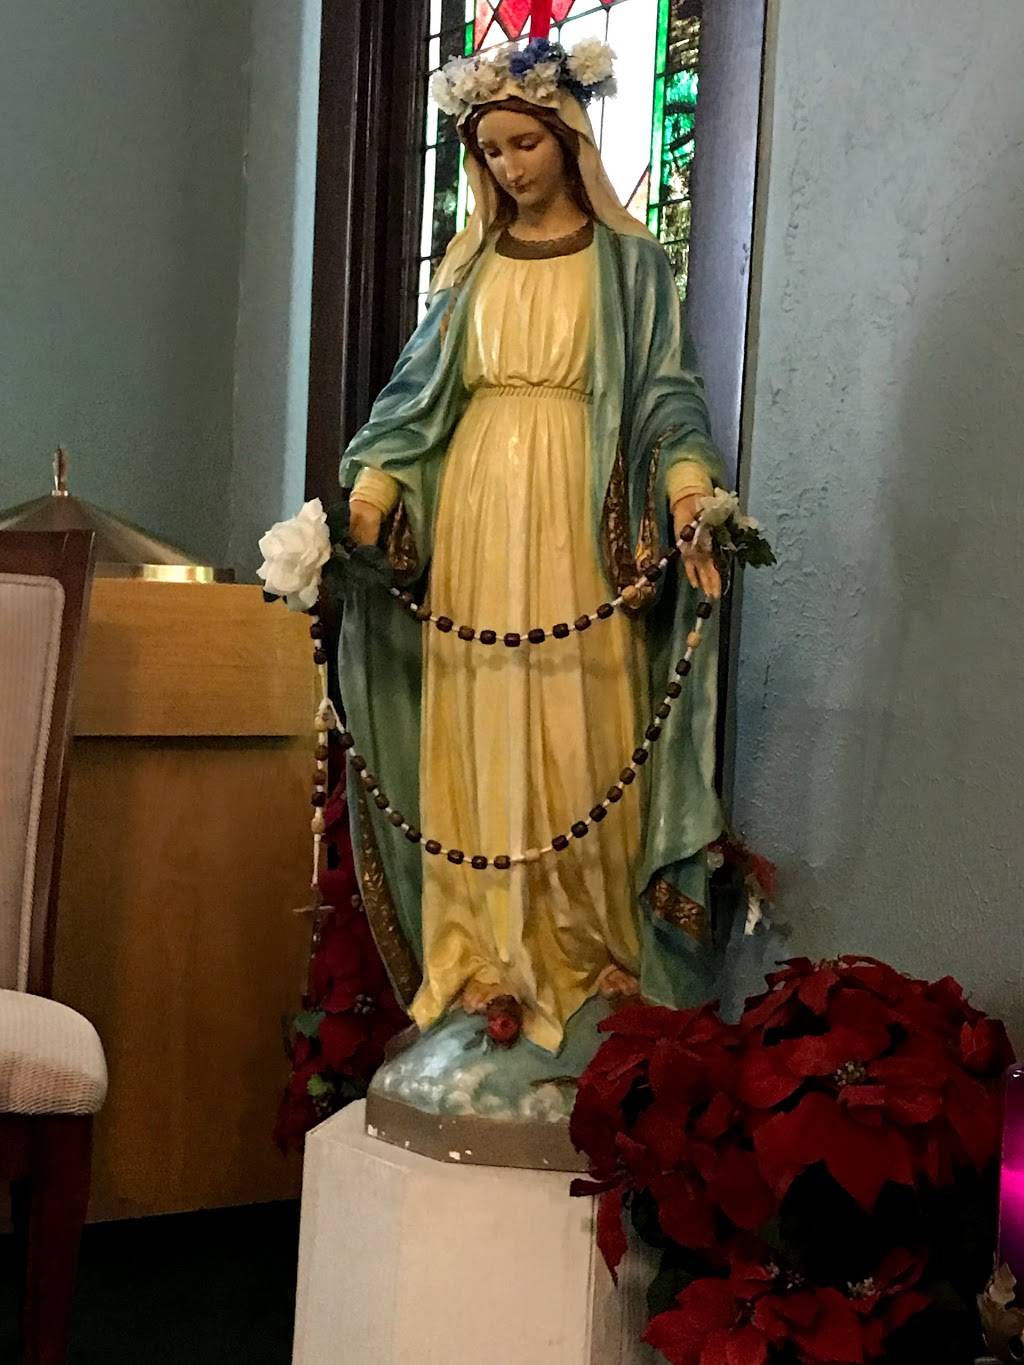 Our Mother of Mercy Catholic Church | 1001 E Terrell Ave, Fort Worth, TX 76104 | Phone: (817) 335-1695